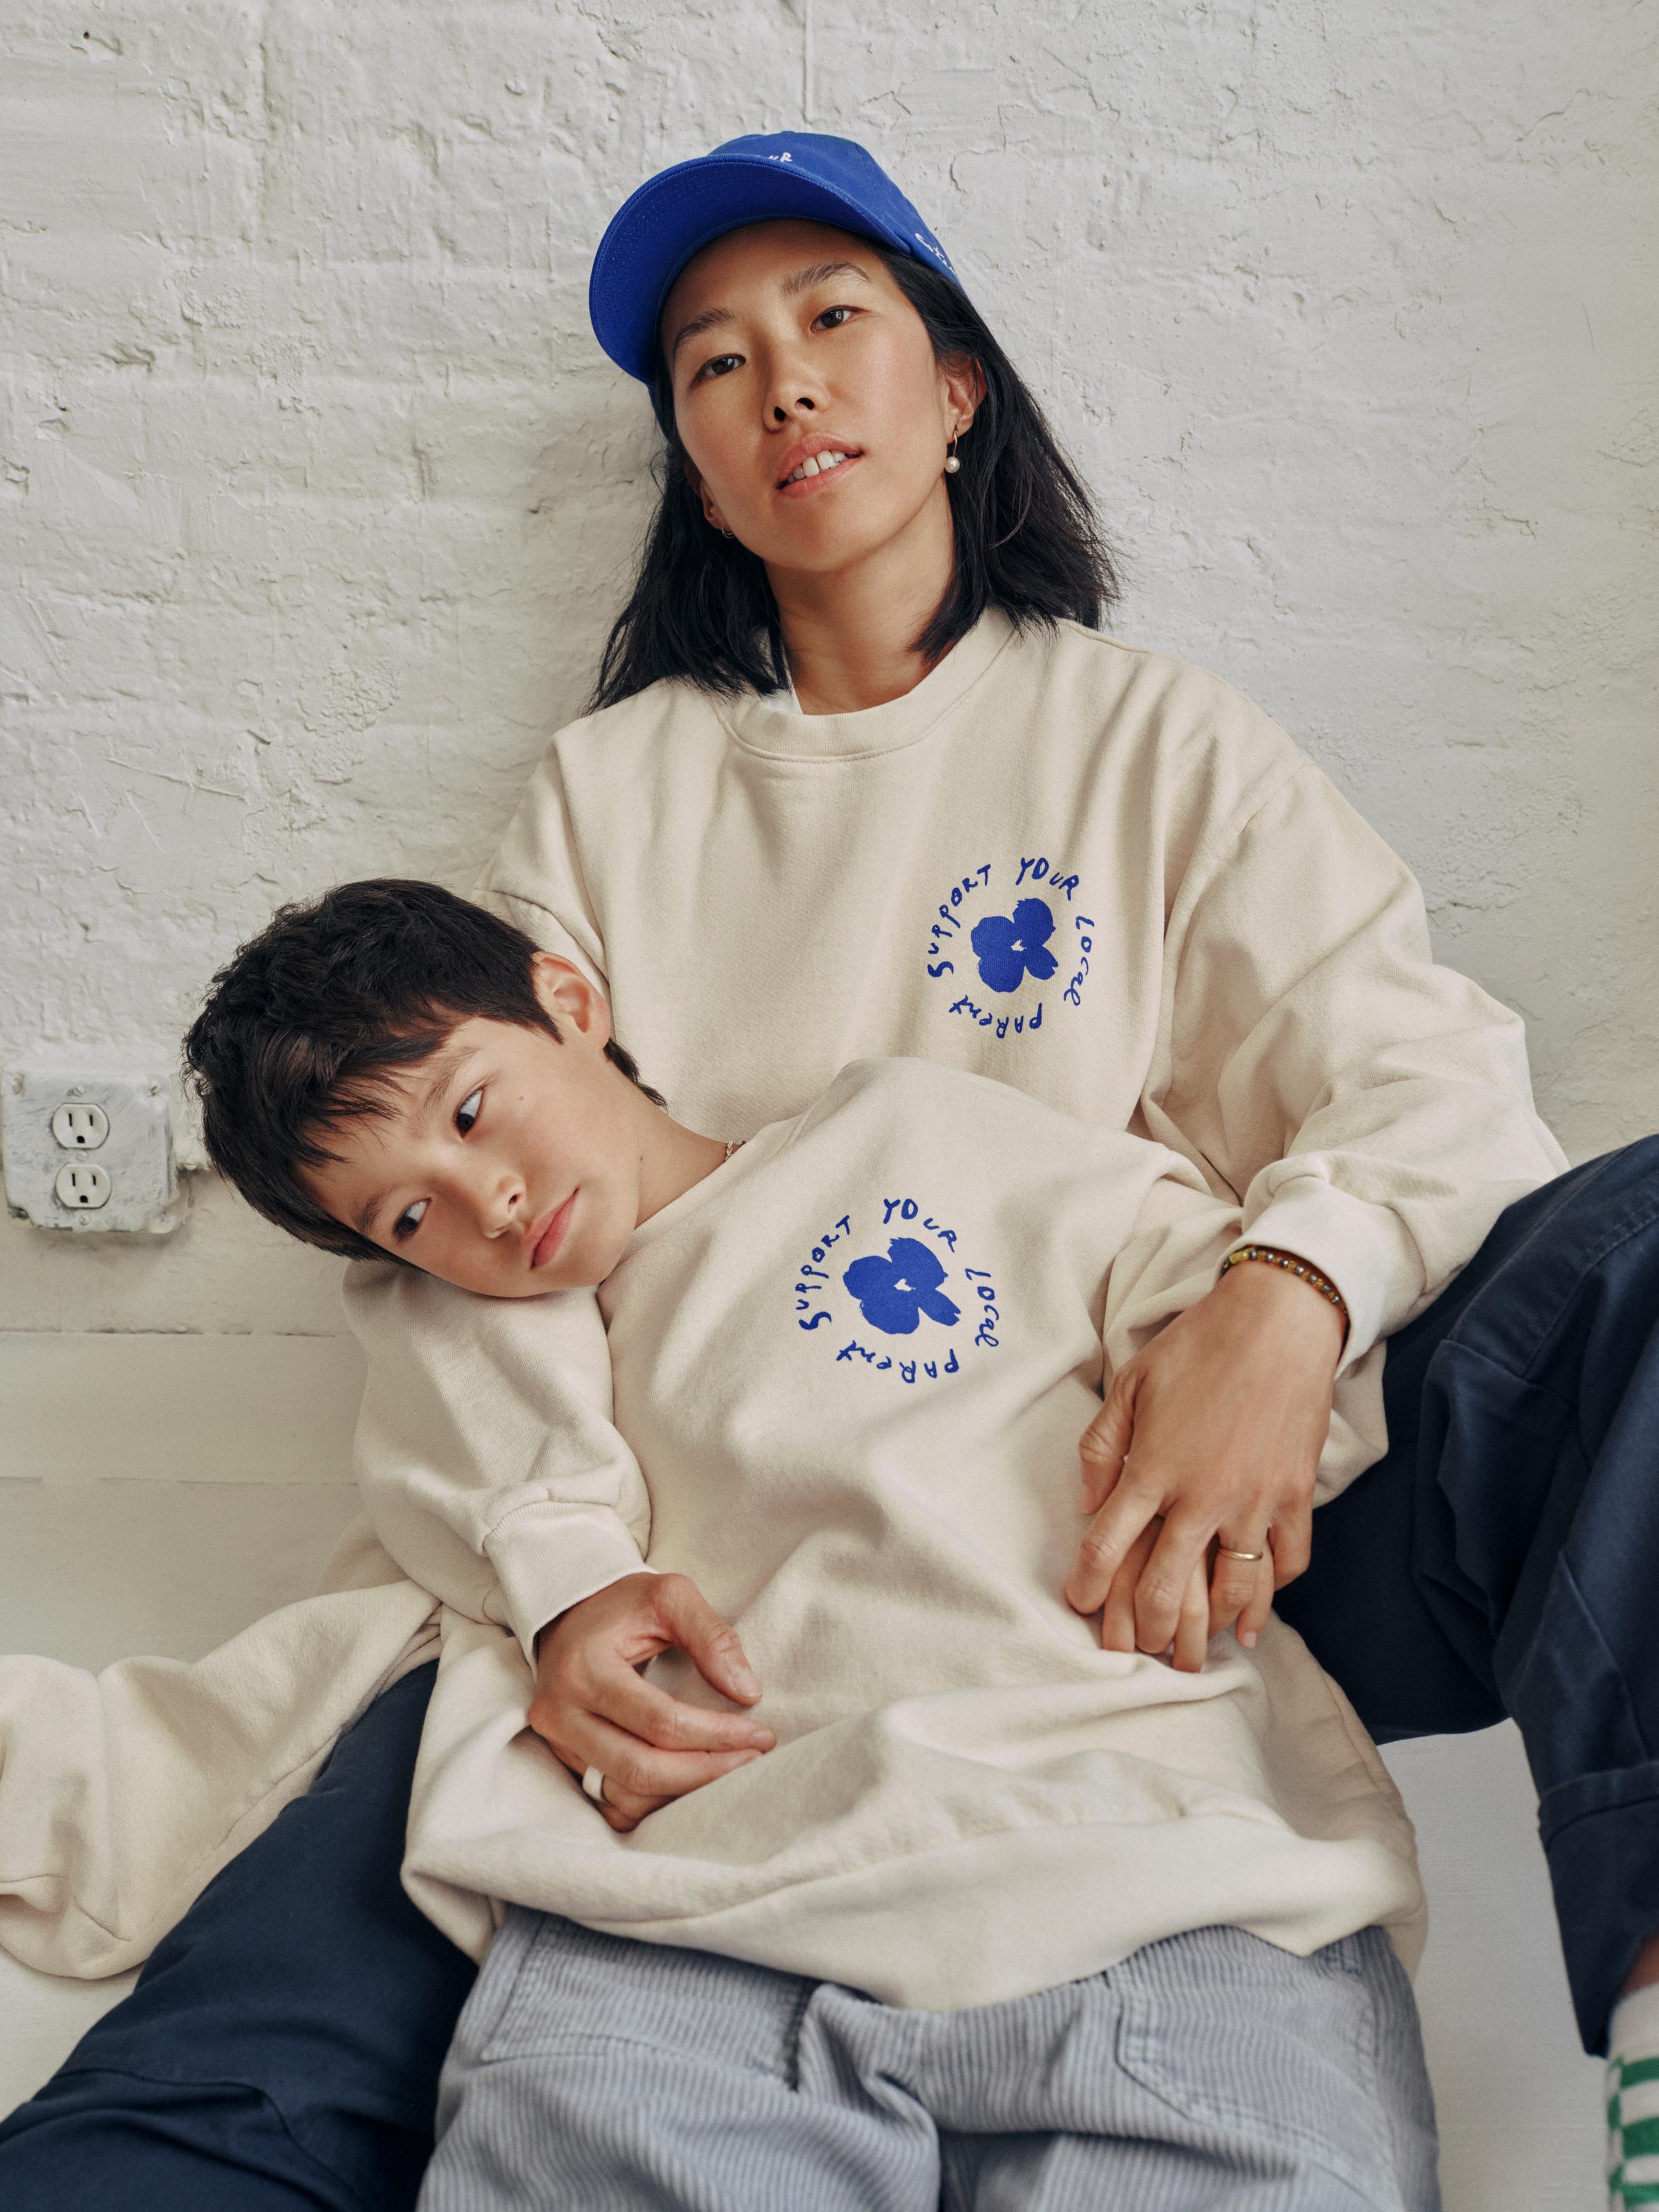 mom and son hold hands while both sporting the SYLP crewneck.